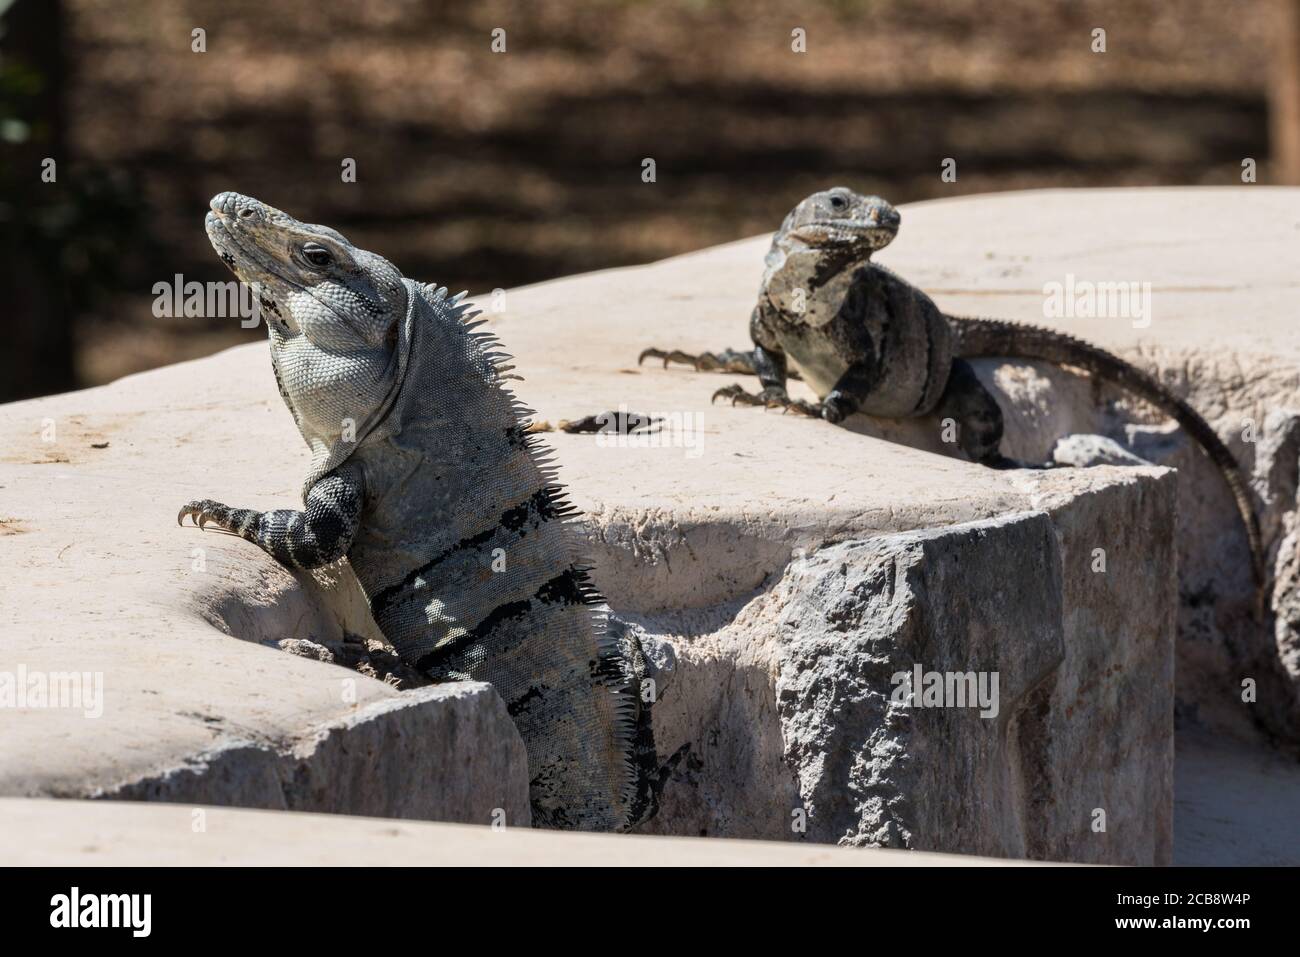 A pair of large Black Spiny-tailed Iguanas in the pre-Hispanic Mayan ruins of Uxmal, Mexico.  The male, with the large spines on his back, is at left Stock Photo